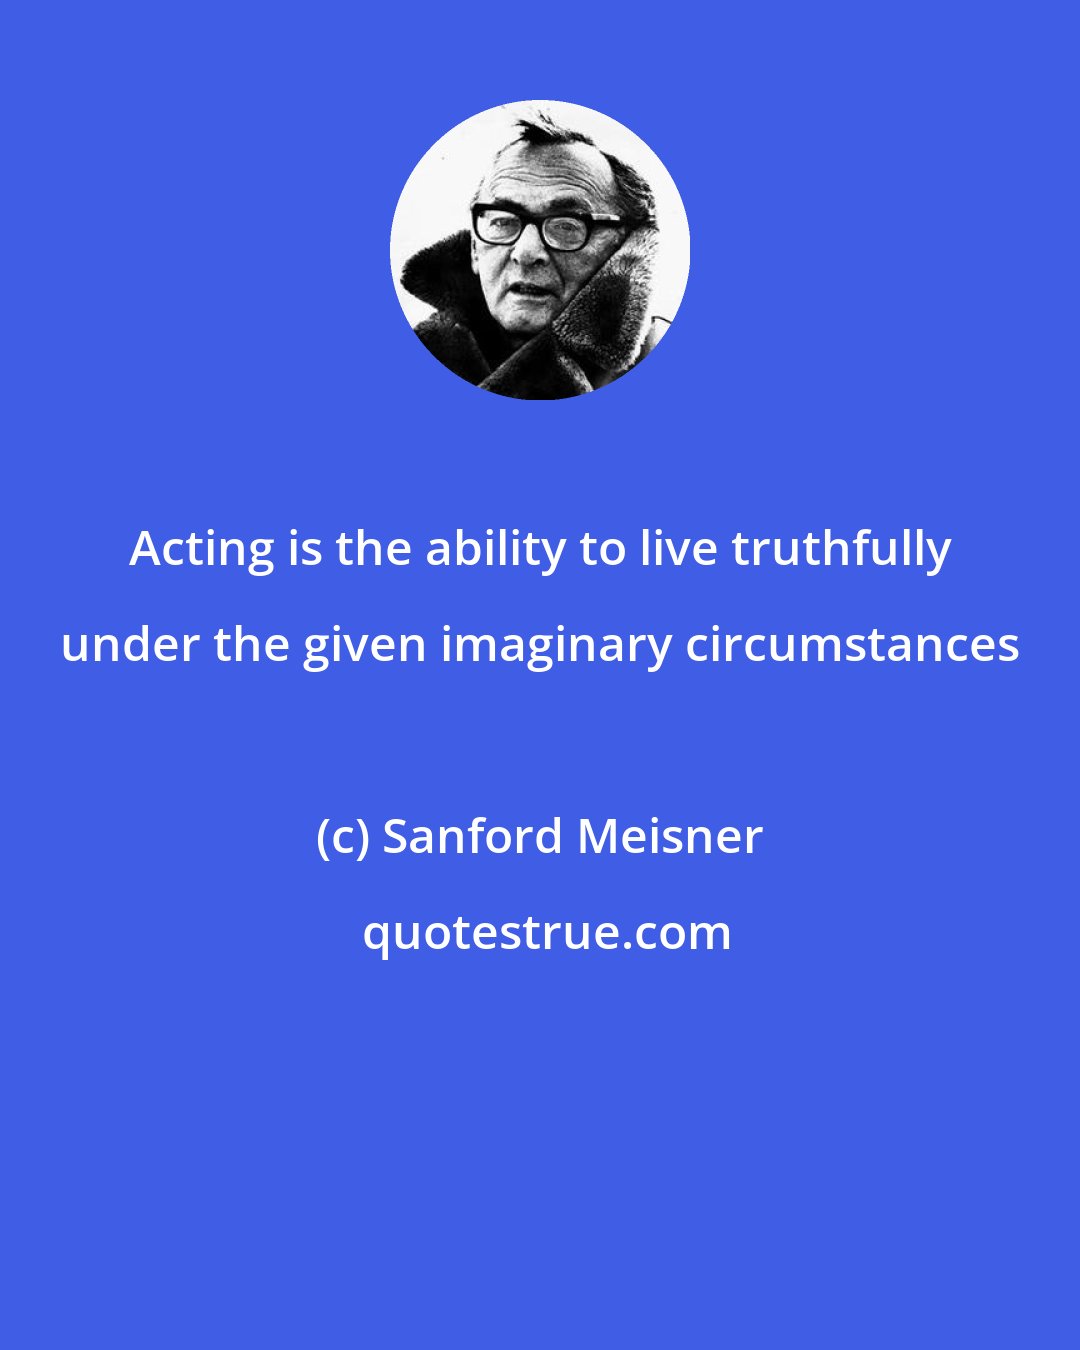 Sanford Meisner: Acting is the ability to live truthfully under the given imaginary circumstances